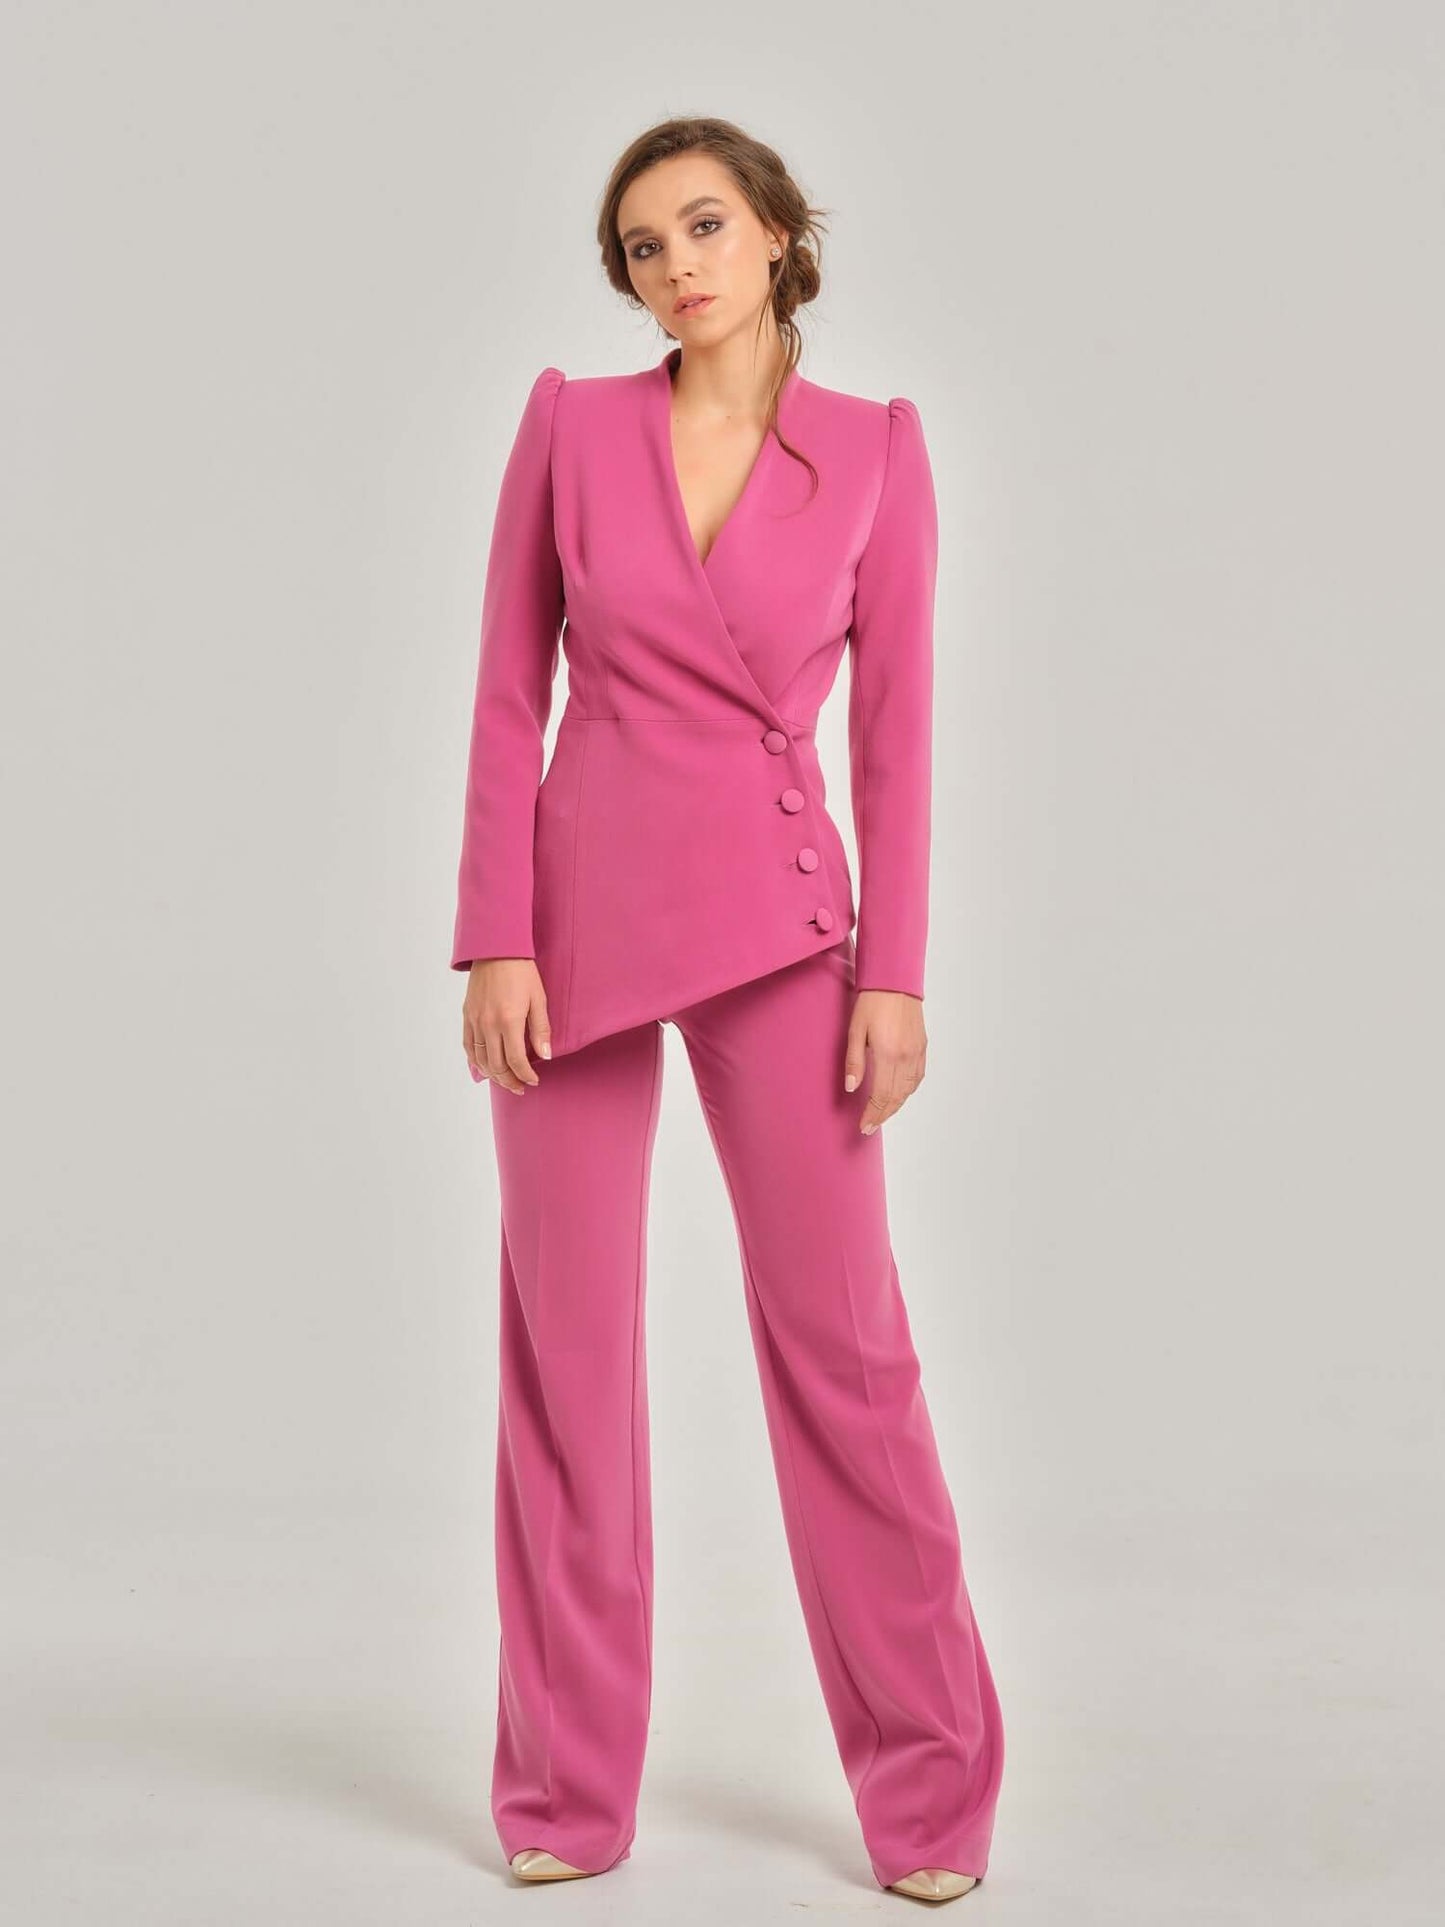 Tia Dorraine Sweet Desire High-Waist Straight-Leg Trousers These must-have classic trousers are a true investment piece as they will transition effortlessly between seasons. Crafted from stretch crepe for everyday comfort, this versatile piece is tailored